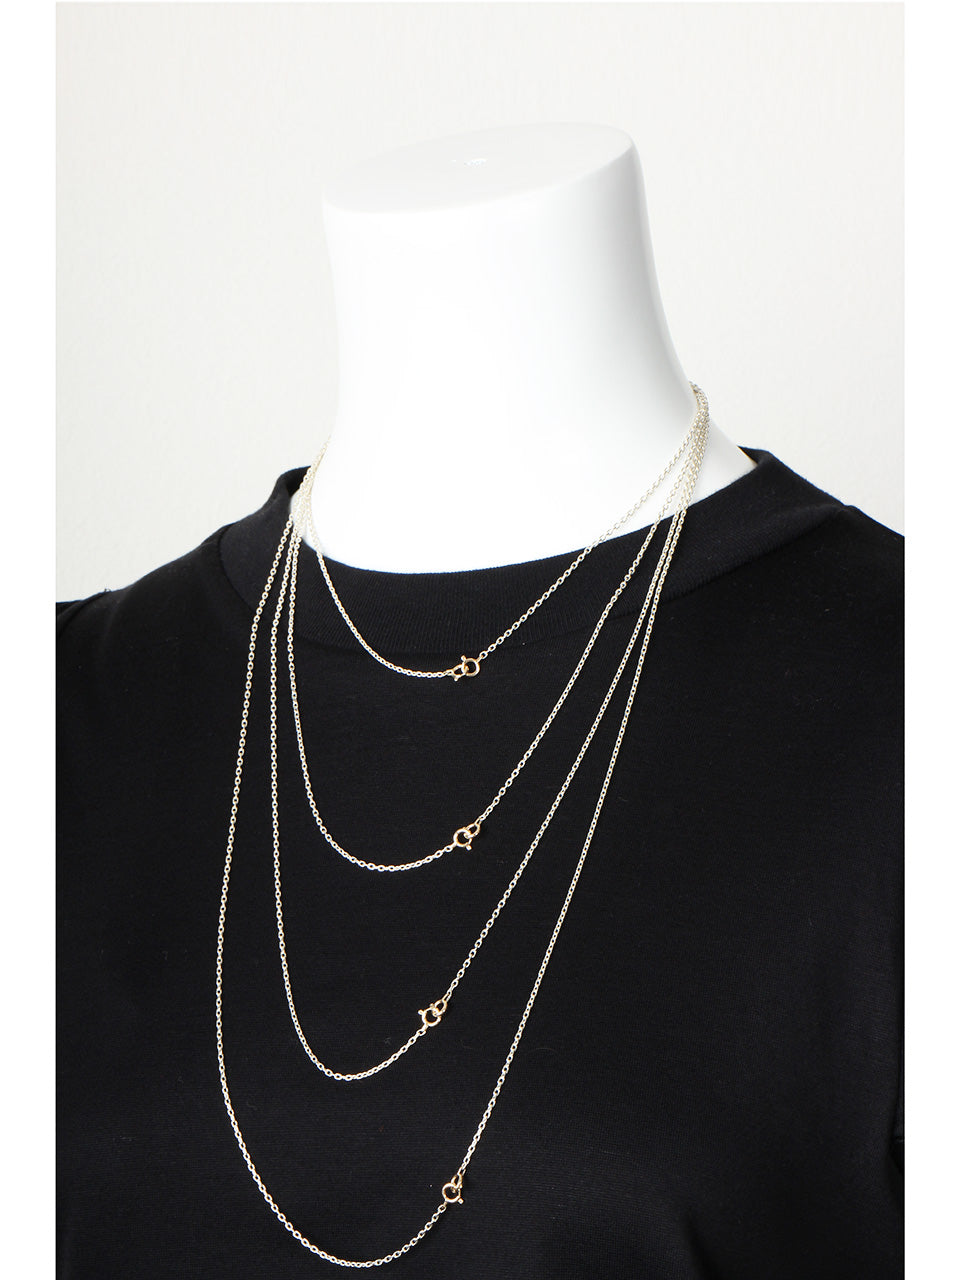 Oval Chain Necklace (70cm)